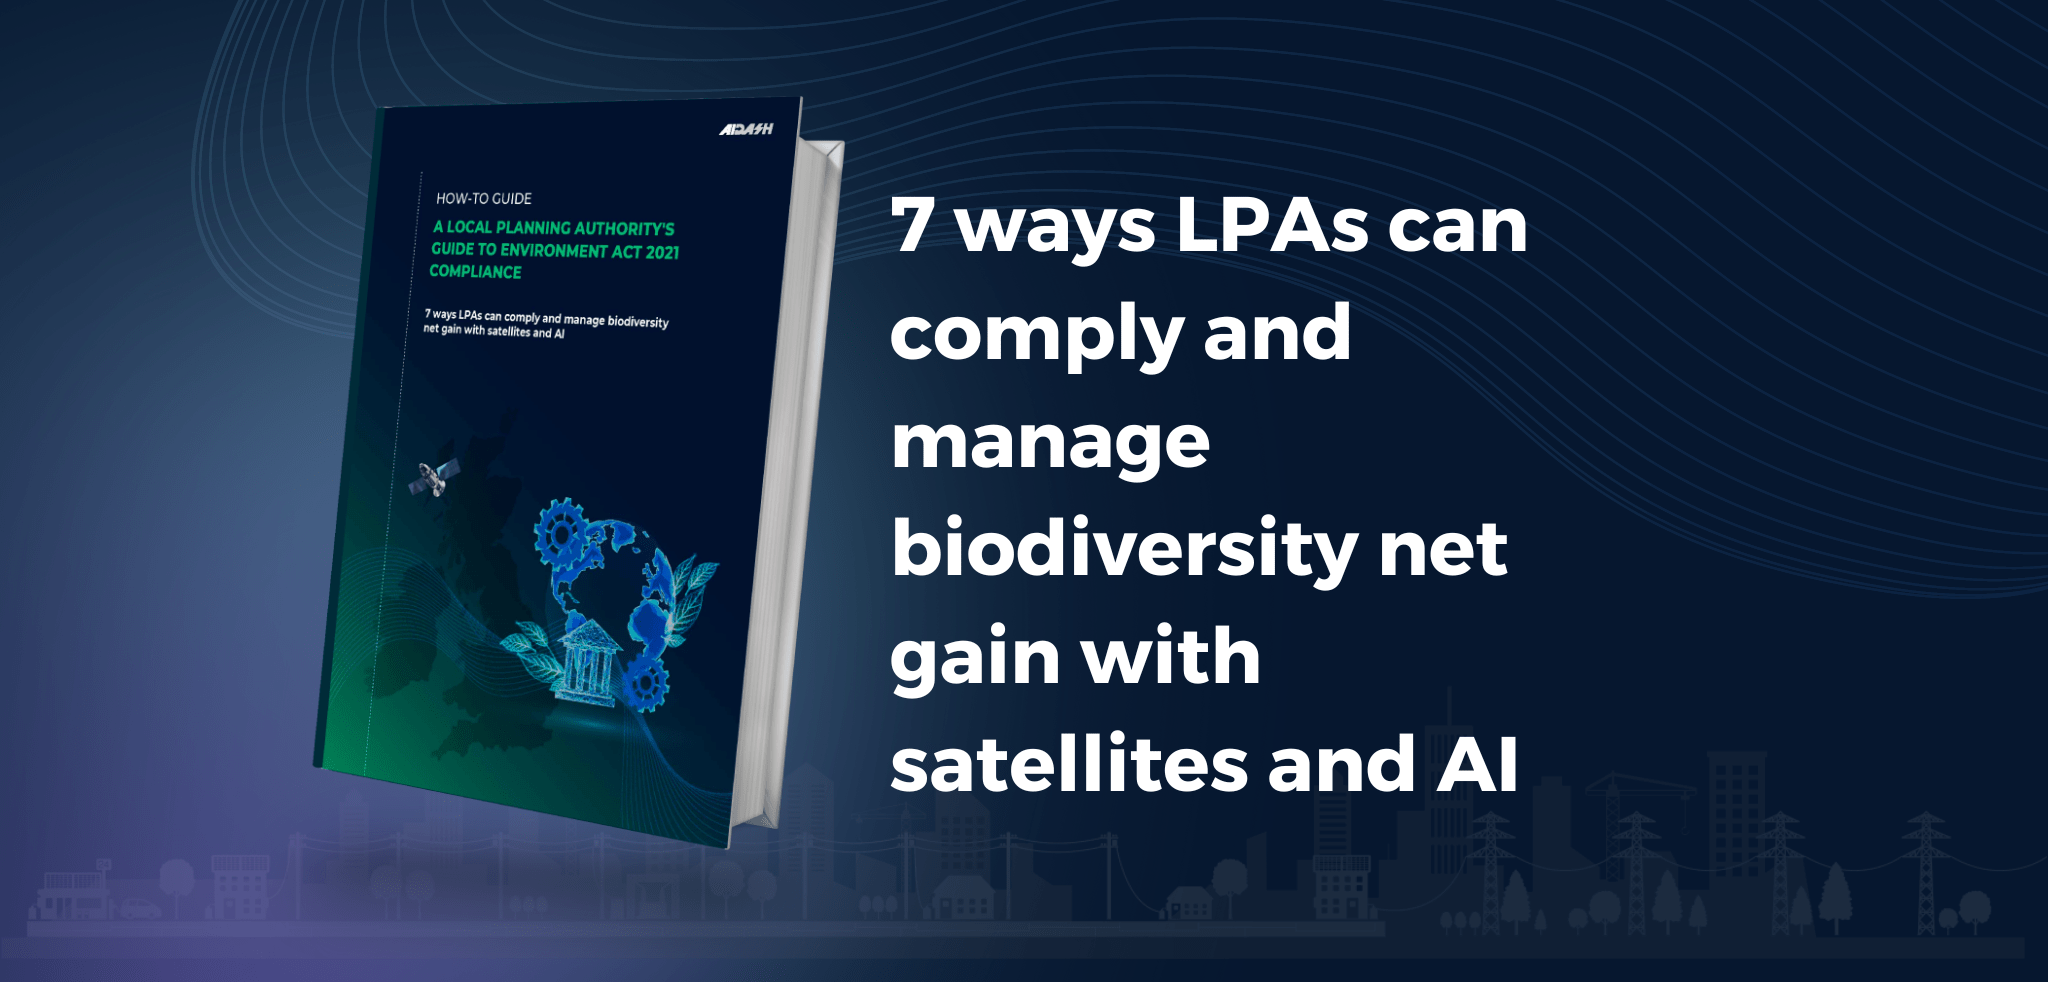 7 ways LPAs can comply with Environment Act 2021 using satellites and AI